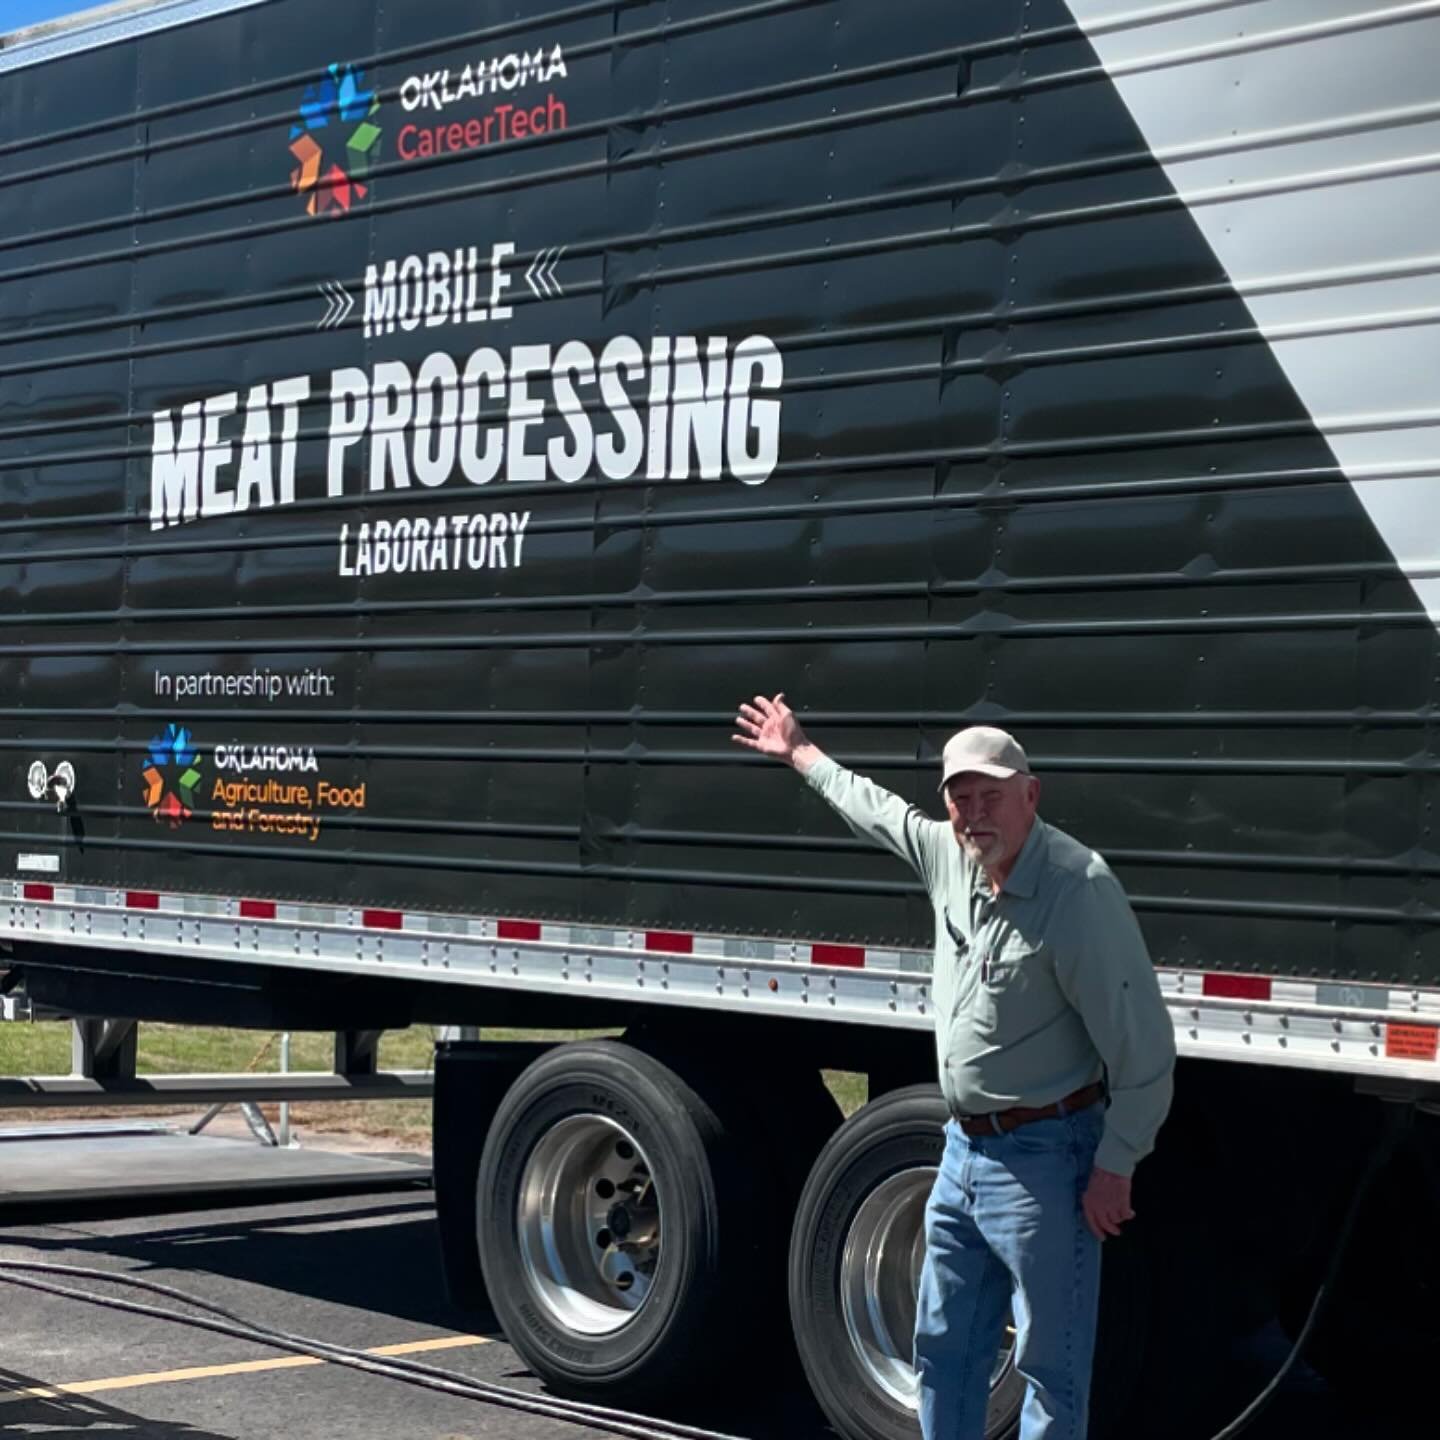 We are pumped to have the Oklahoma CareerTech Mobile Meat Lab on campus! Instructor Bob Jones came to check it out. 

We are offering meat processing classes for Beef, Pork, and Goat/Sheep. These classes will instruct you on the proper methods for tr